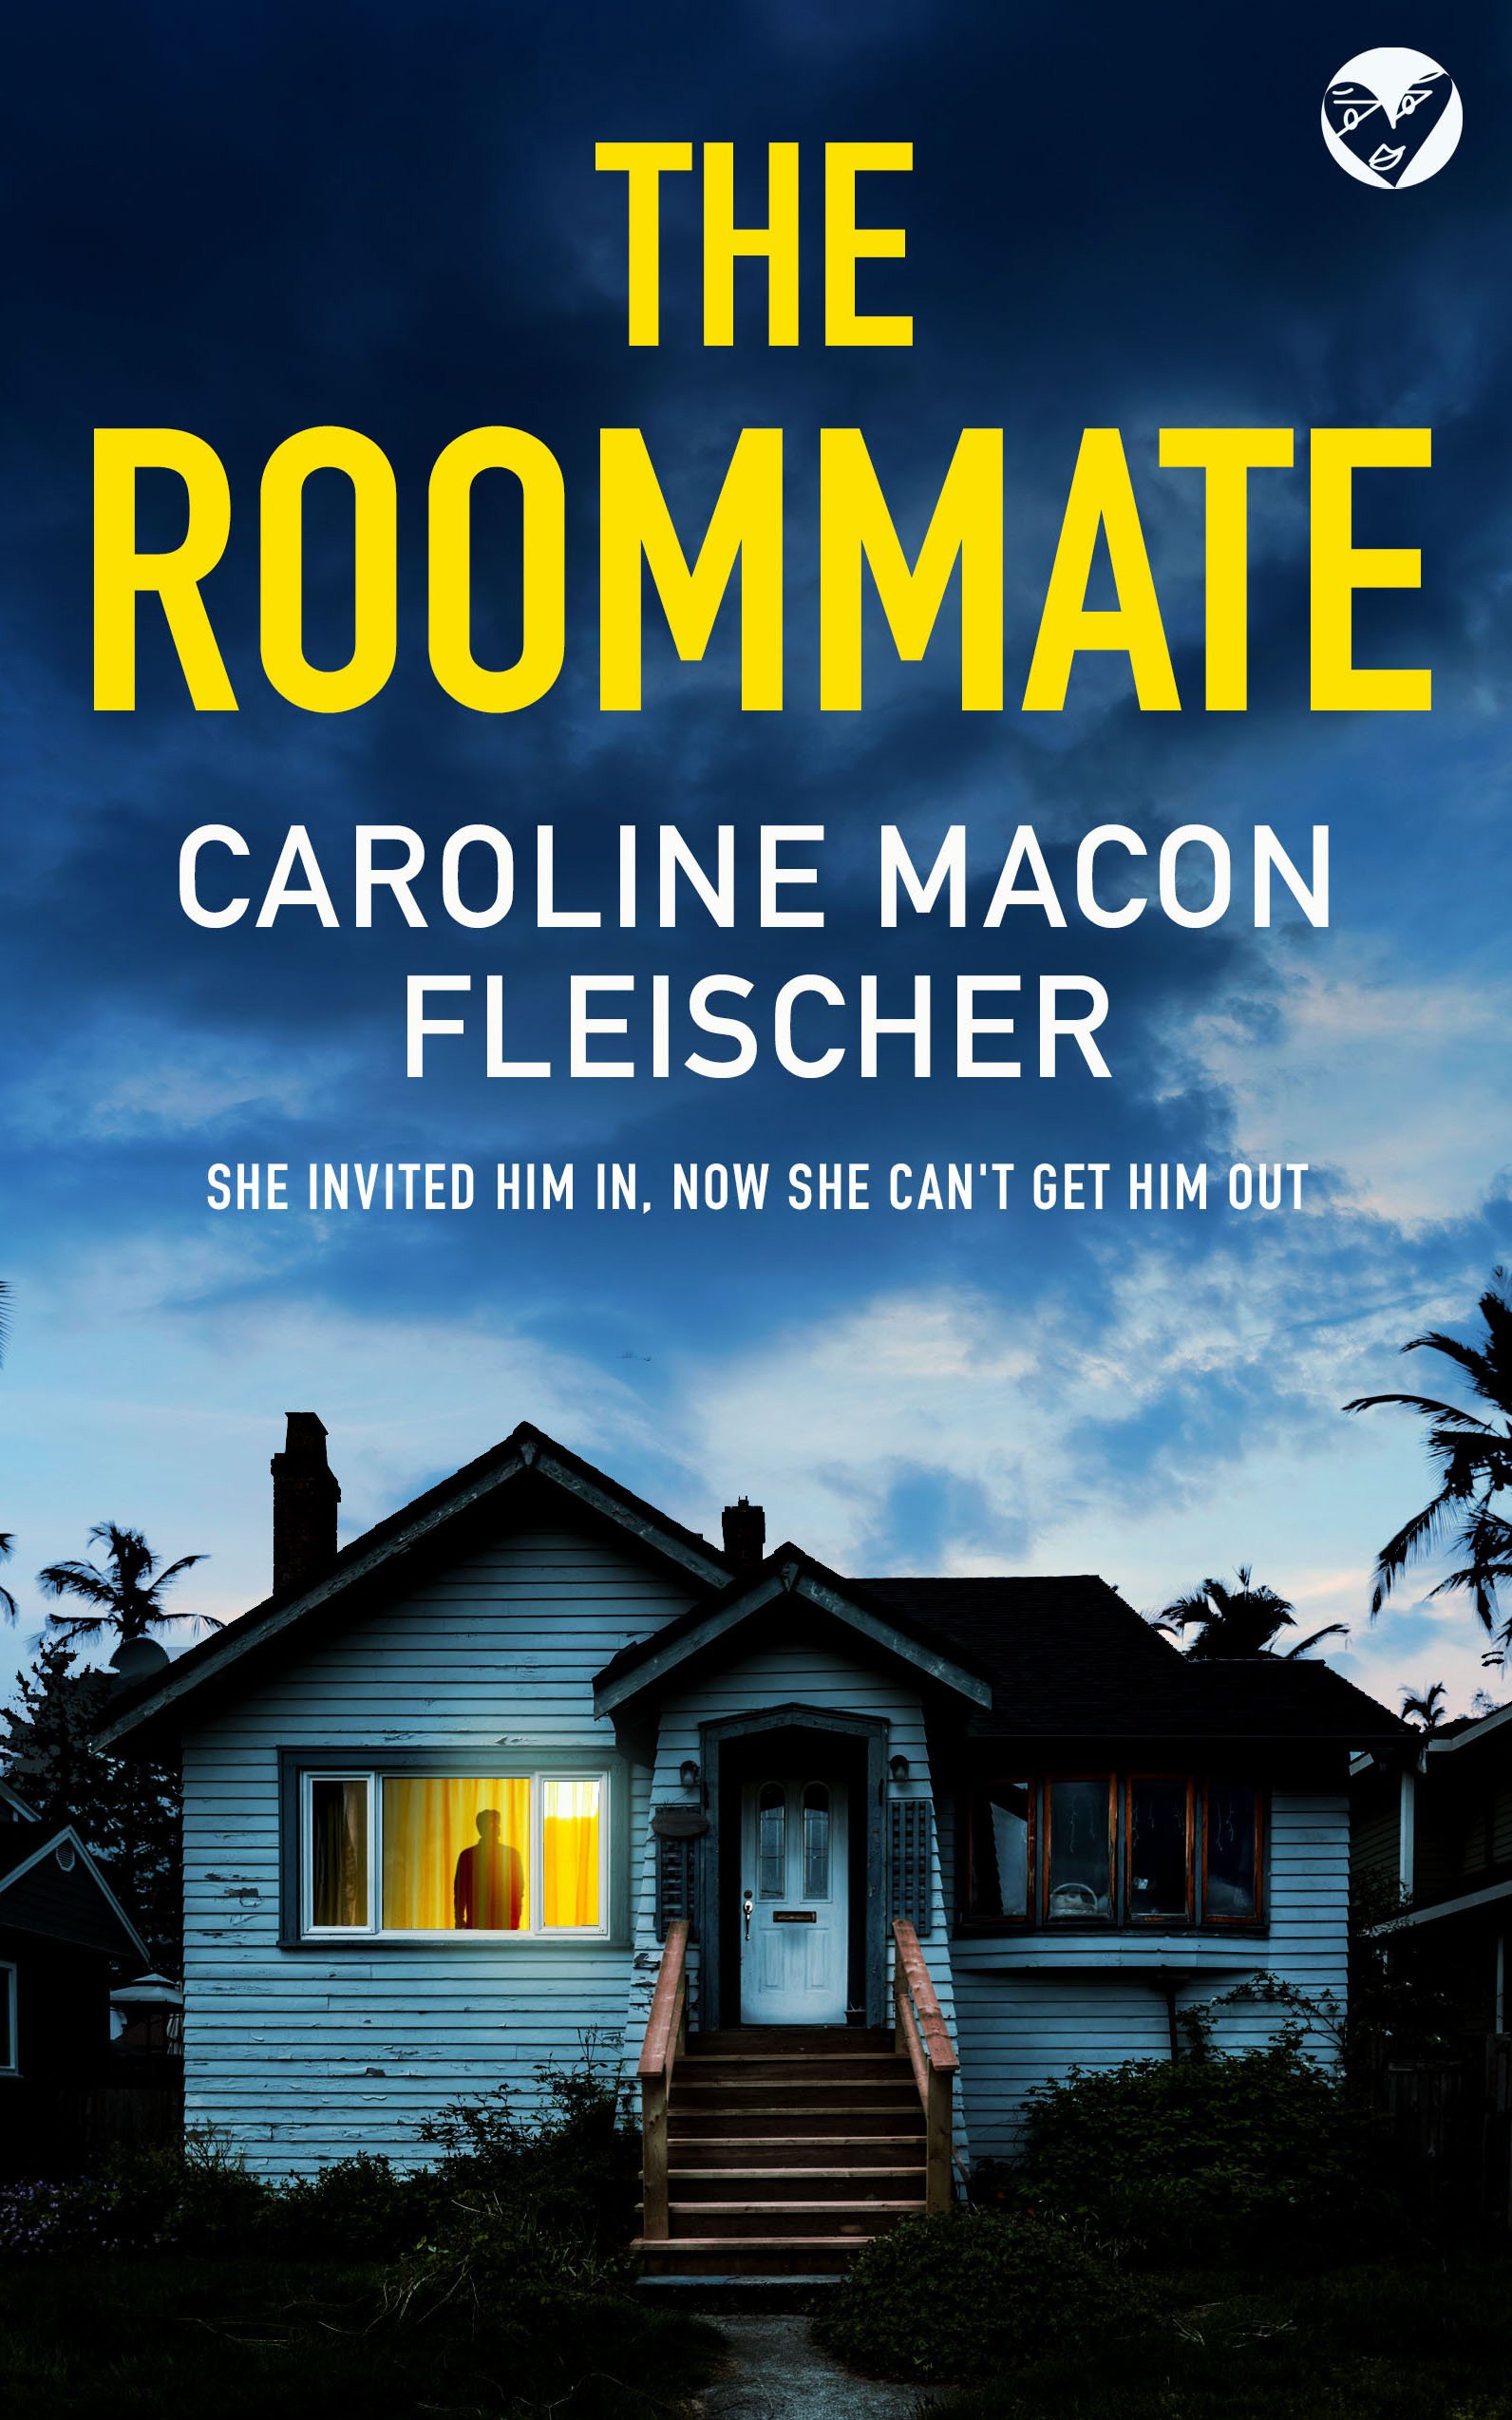 THE ROOMMATE Cover publish 642KB.jpg